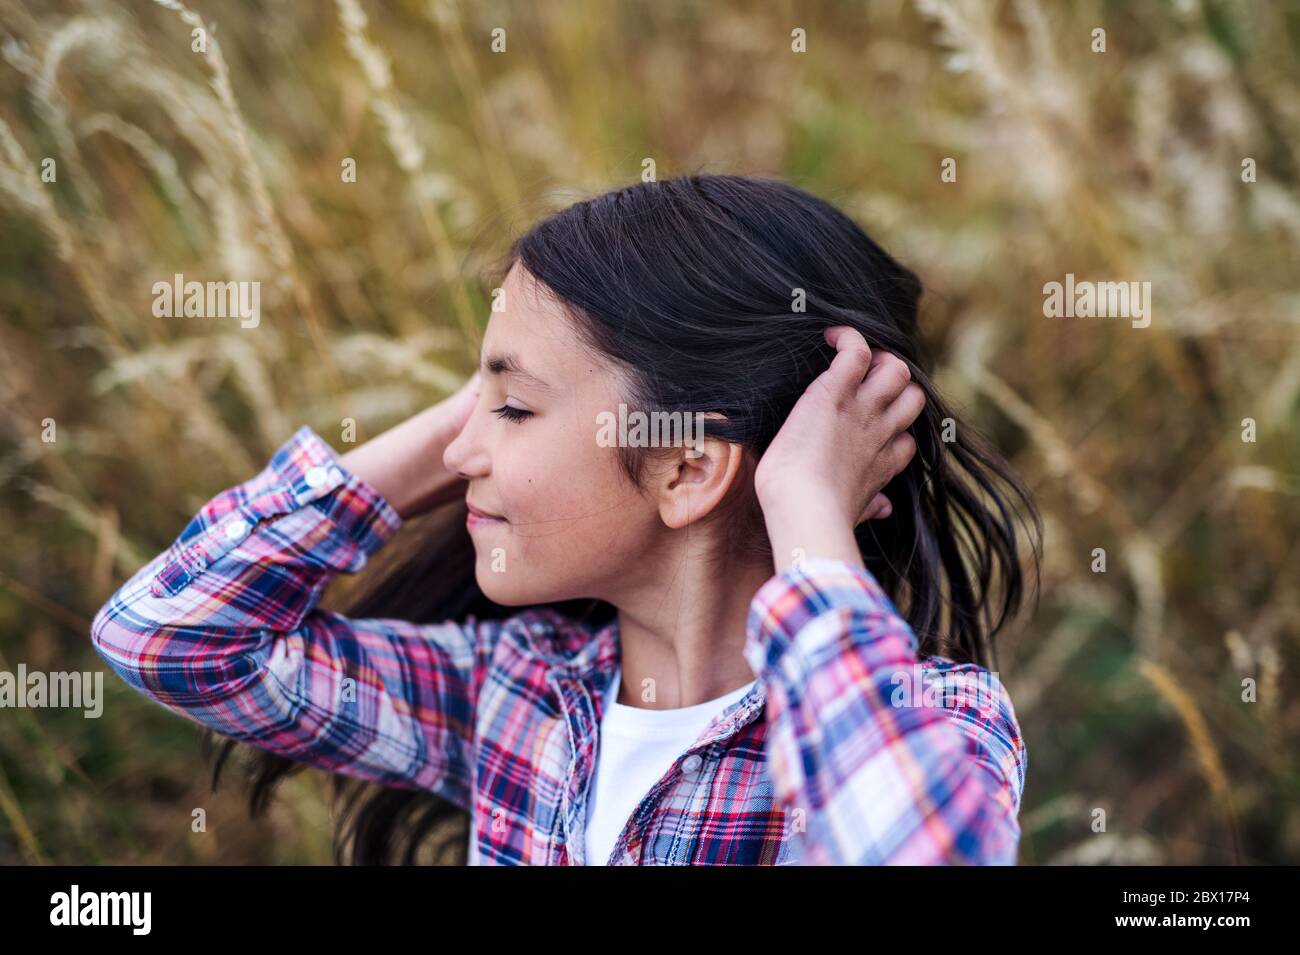 A school child standing on field trip in nature, headshot. Copy space. Stock Photo